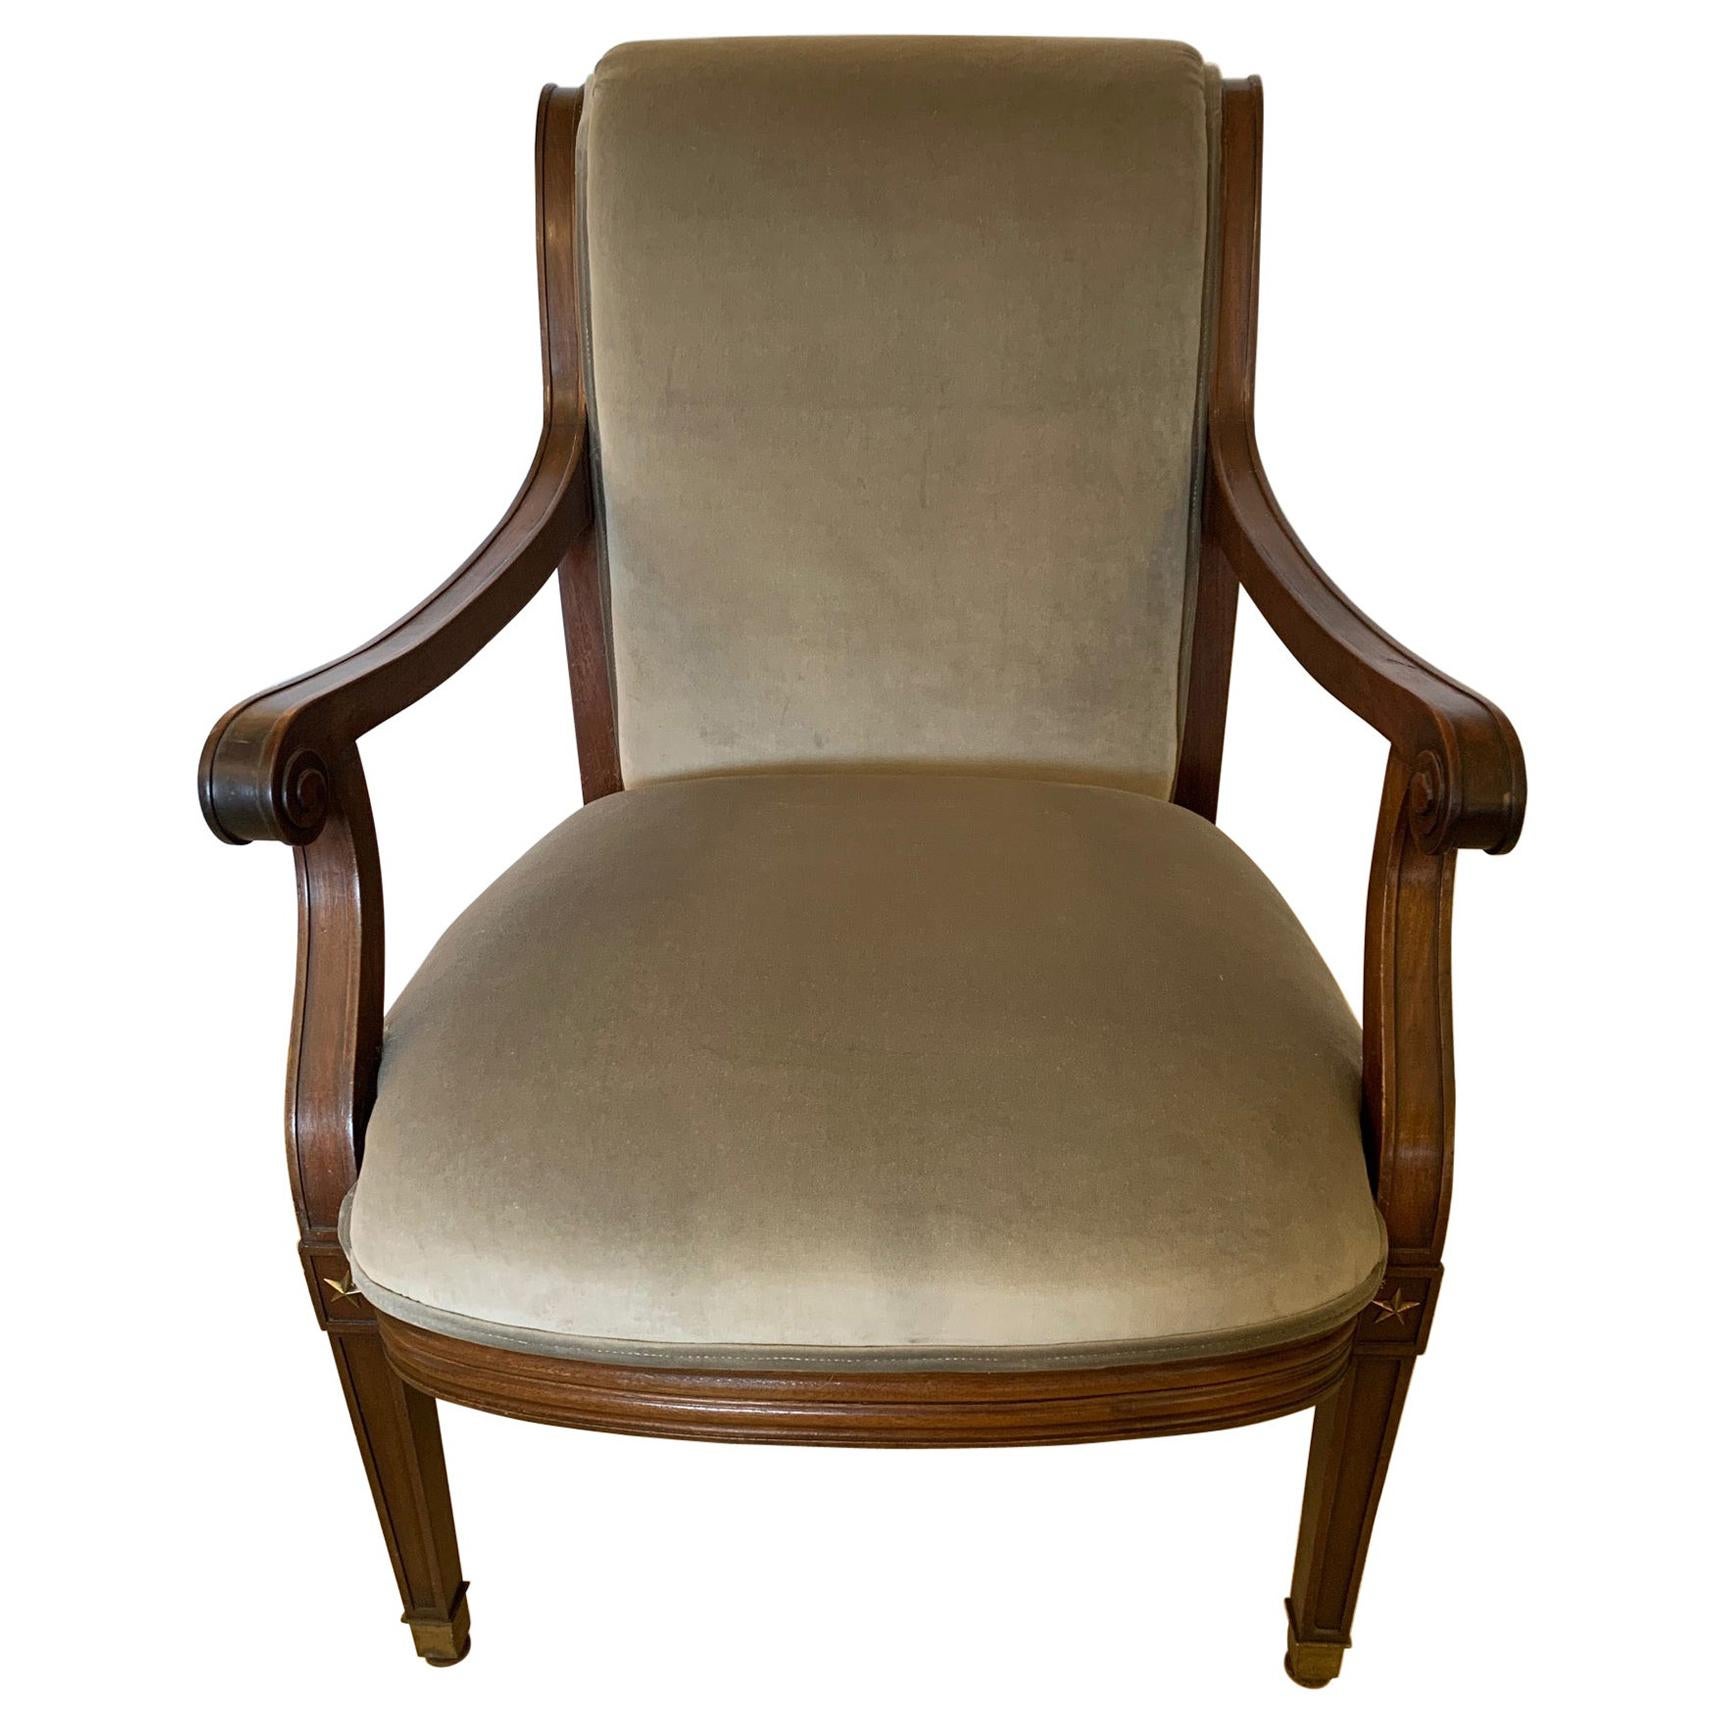 Regal Regency 19th century neoclassical mahogany and newly upholstered grey velvet arm chair having handsome brass stars where legs meet the seat and scroll arms. Brass caps finish the legs.
Measures: arm height 26.25
seat depth 21.5.